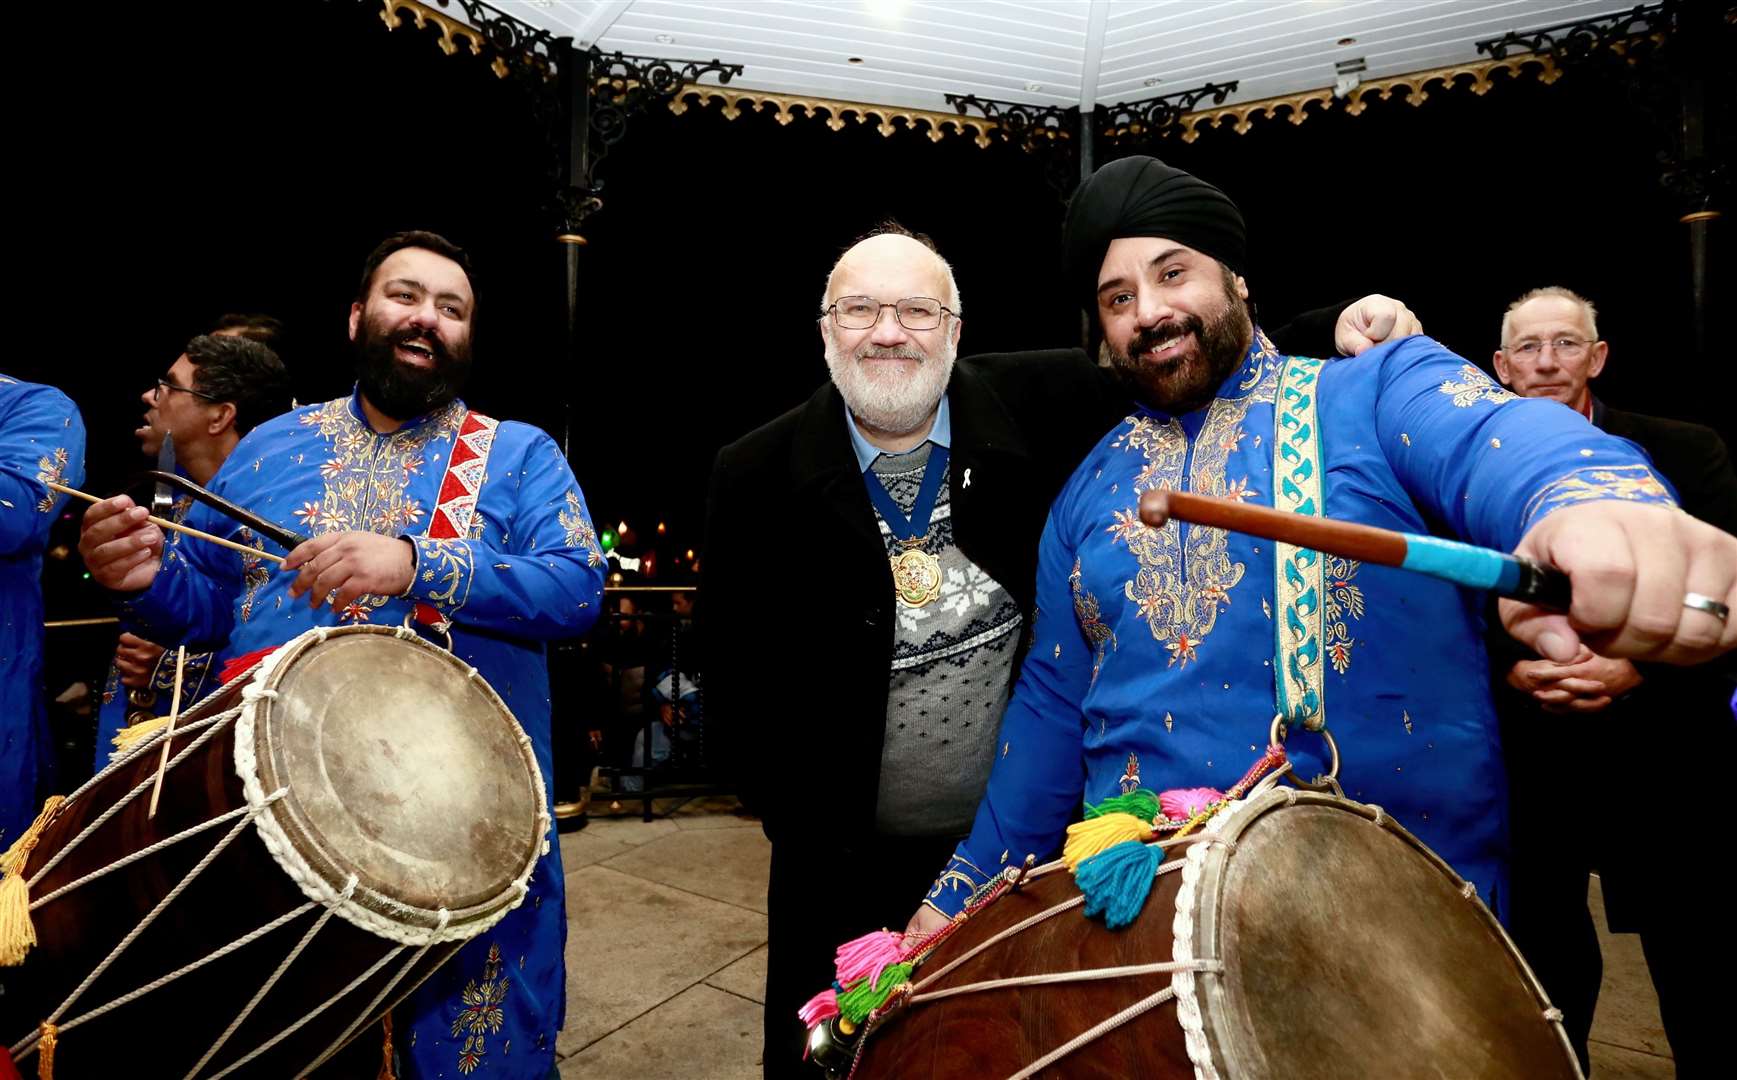 Drumming band, Kings of Dhol will perform